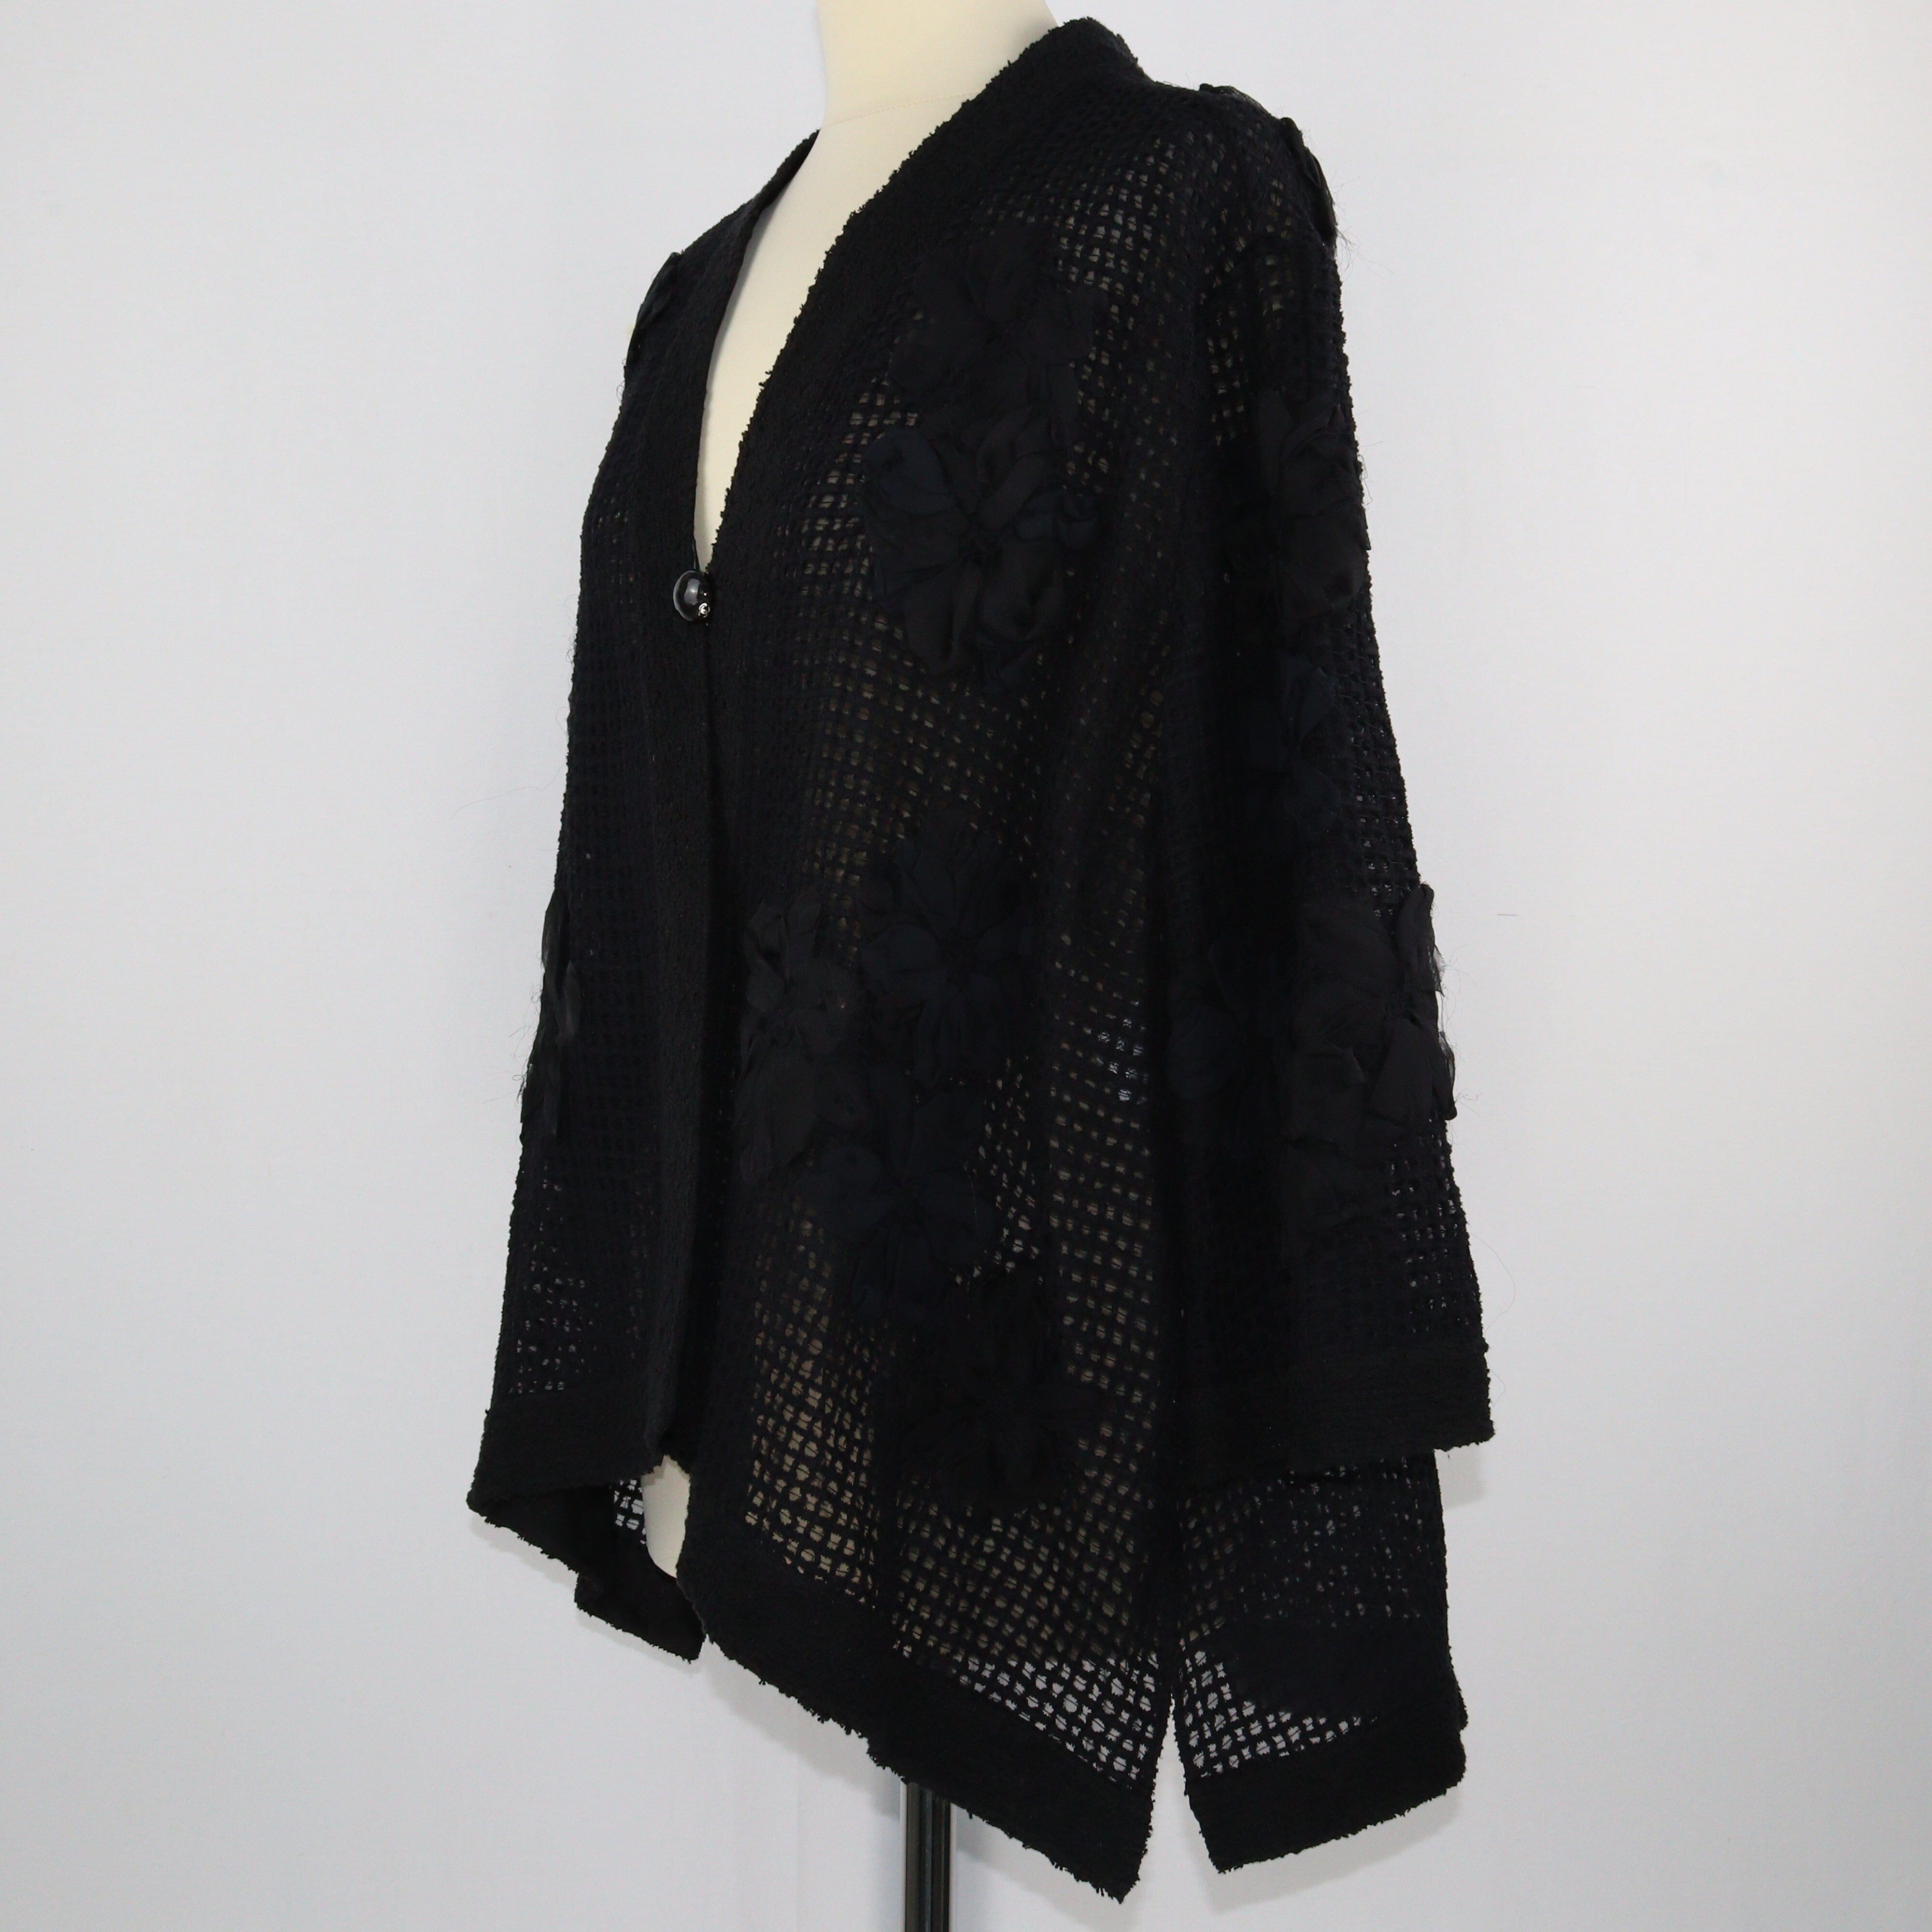 Black Lace Flower Detail Cardigan Clothings Chanel 